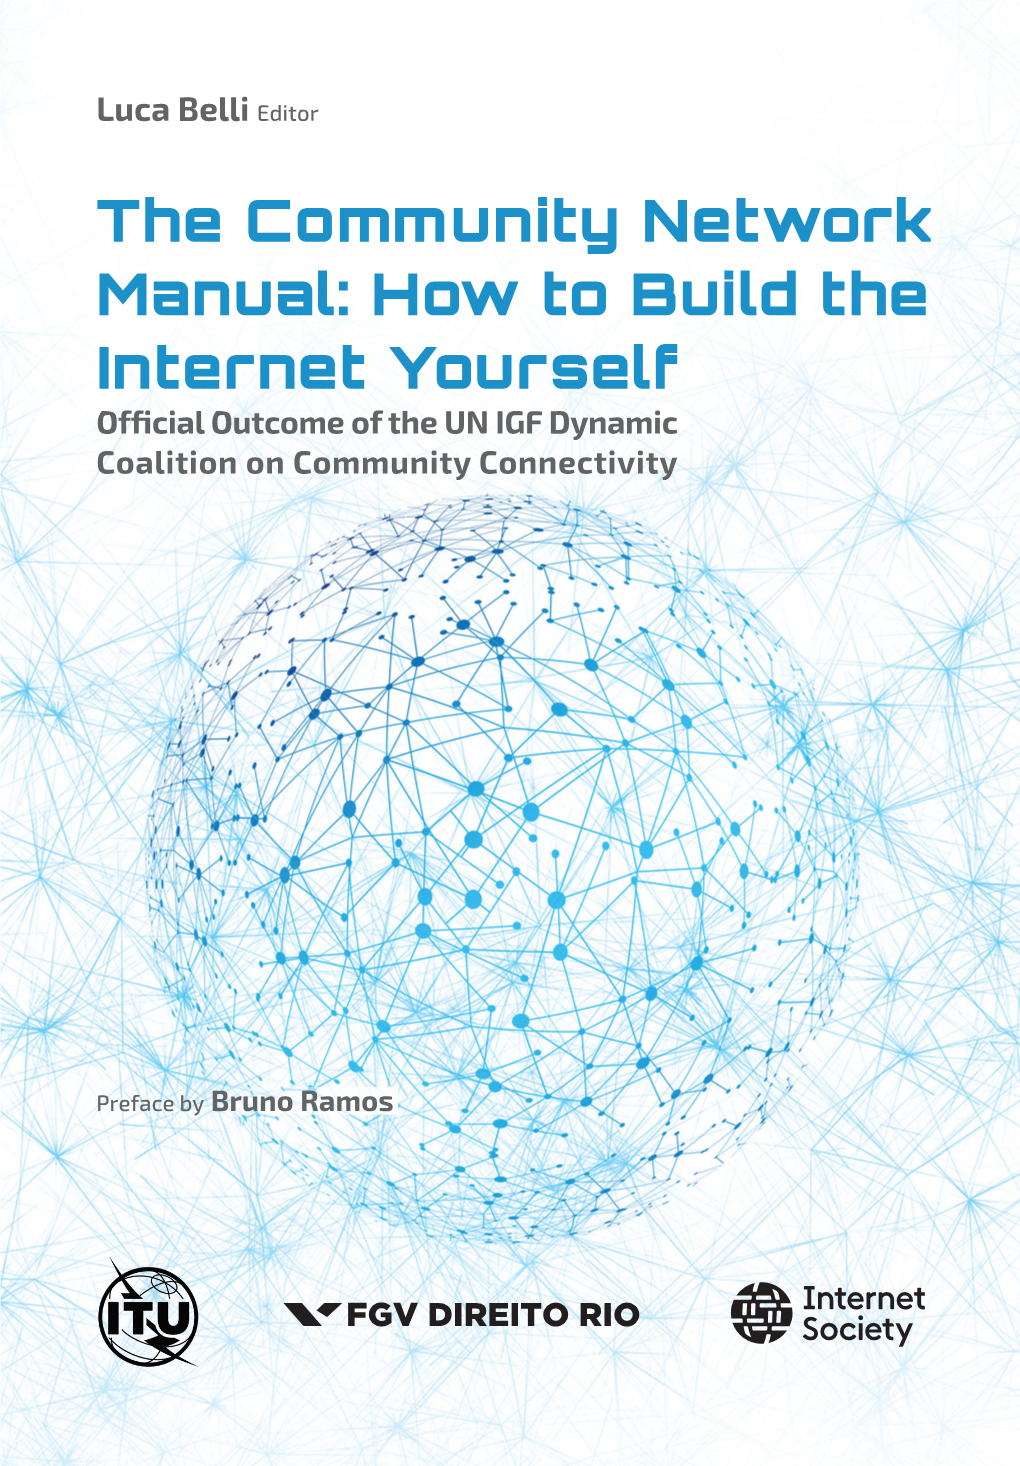 THE COMMUNITY NETWORK MANUAL: HOW to BUILD the INTERNET YOURSELF the Community Network Manual: How to Build the Internet Yourself